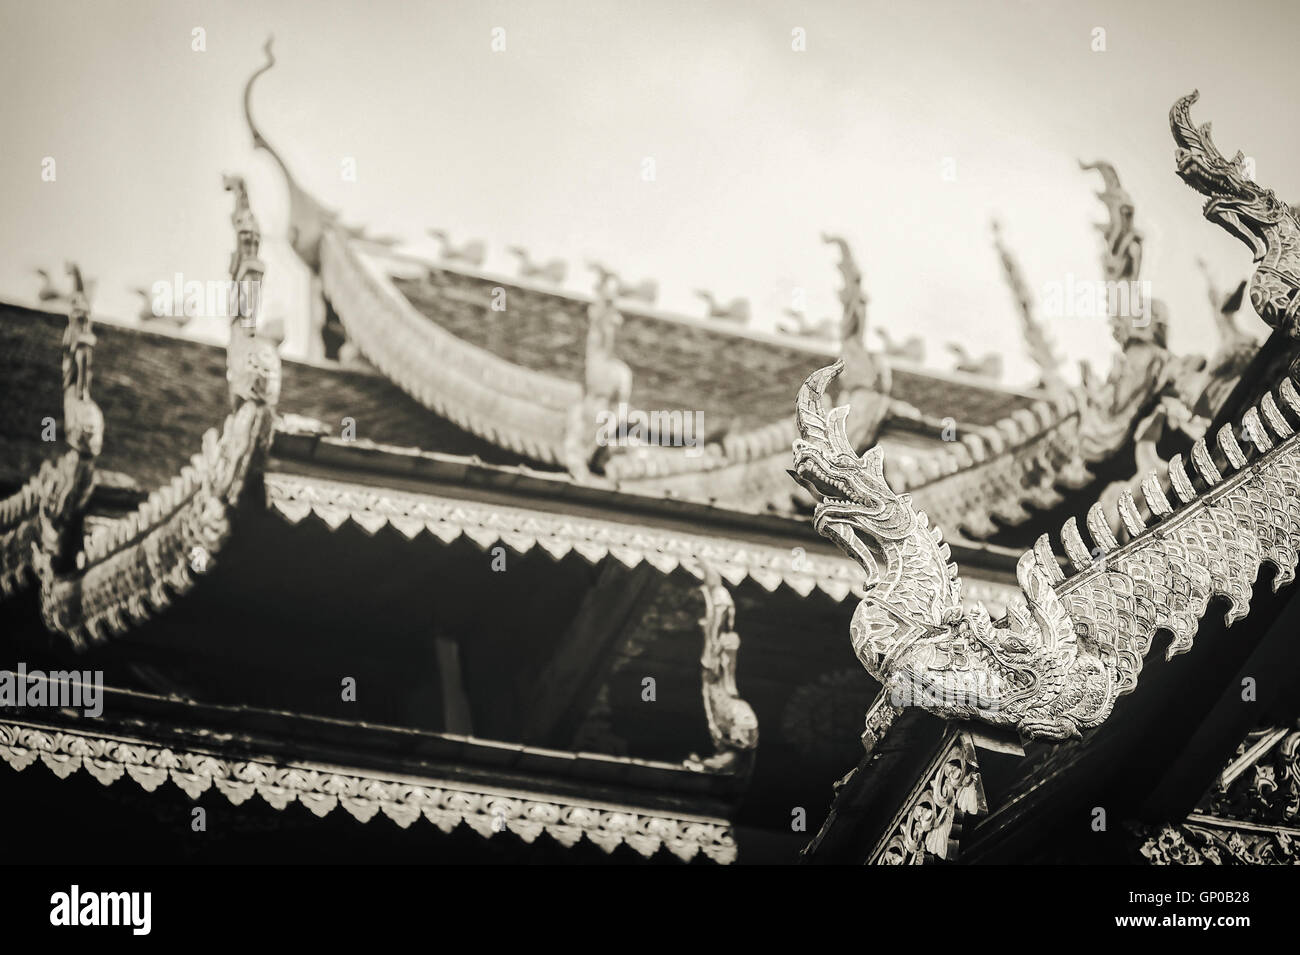 Thailand art and architecture: Naga wood carved on roof at Thai temple. Sepia tone. Stock Photo